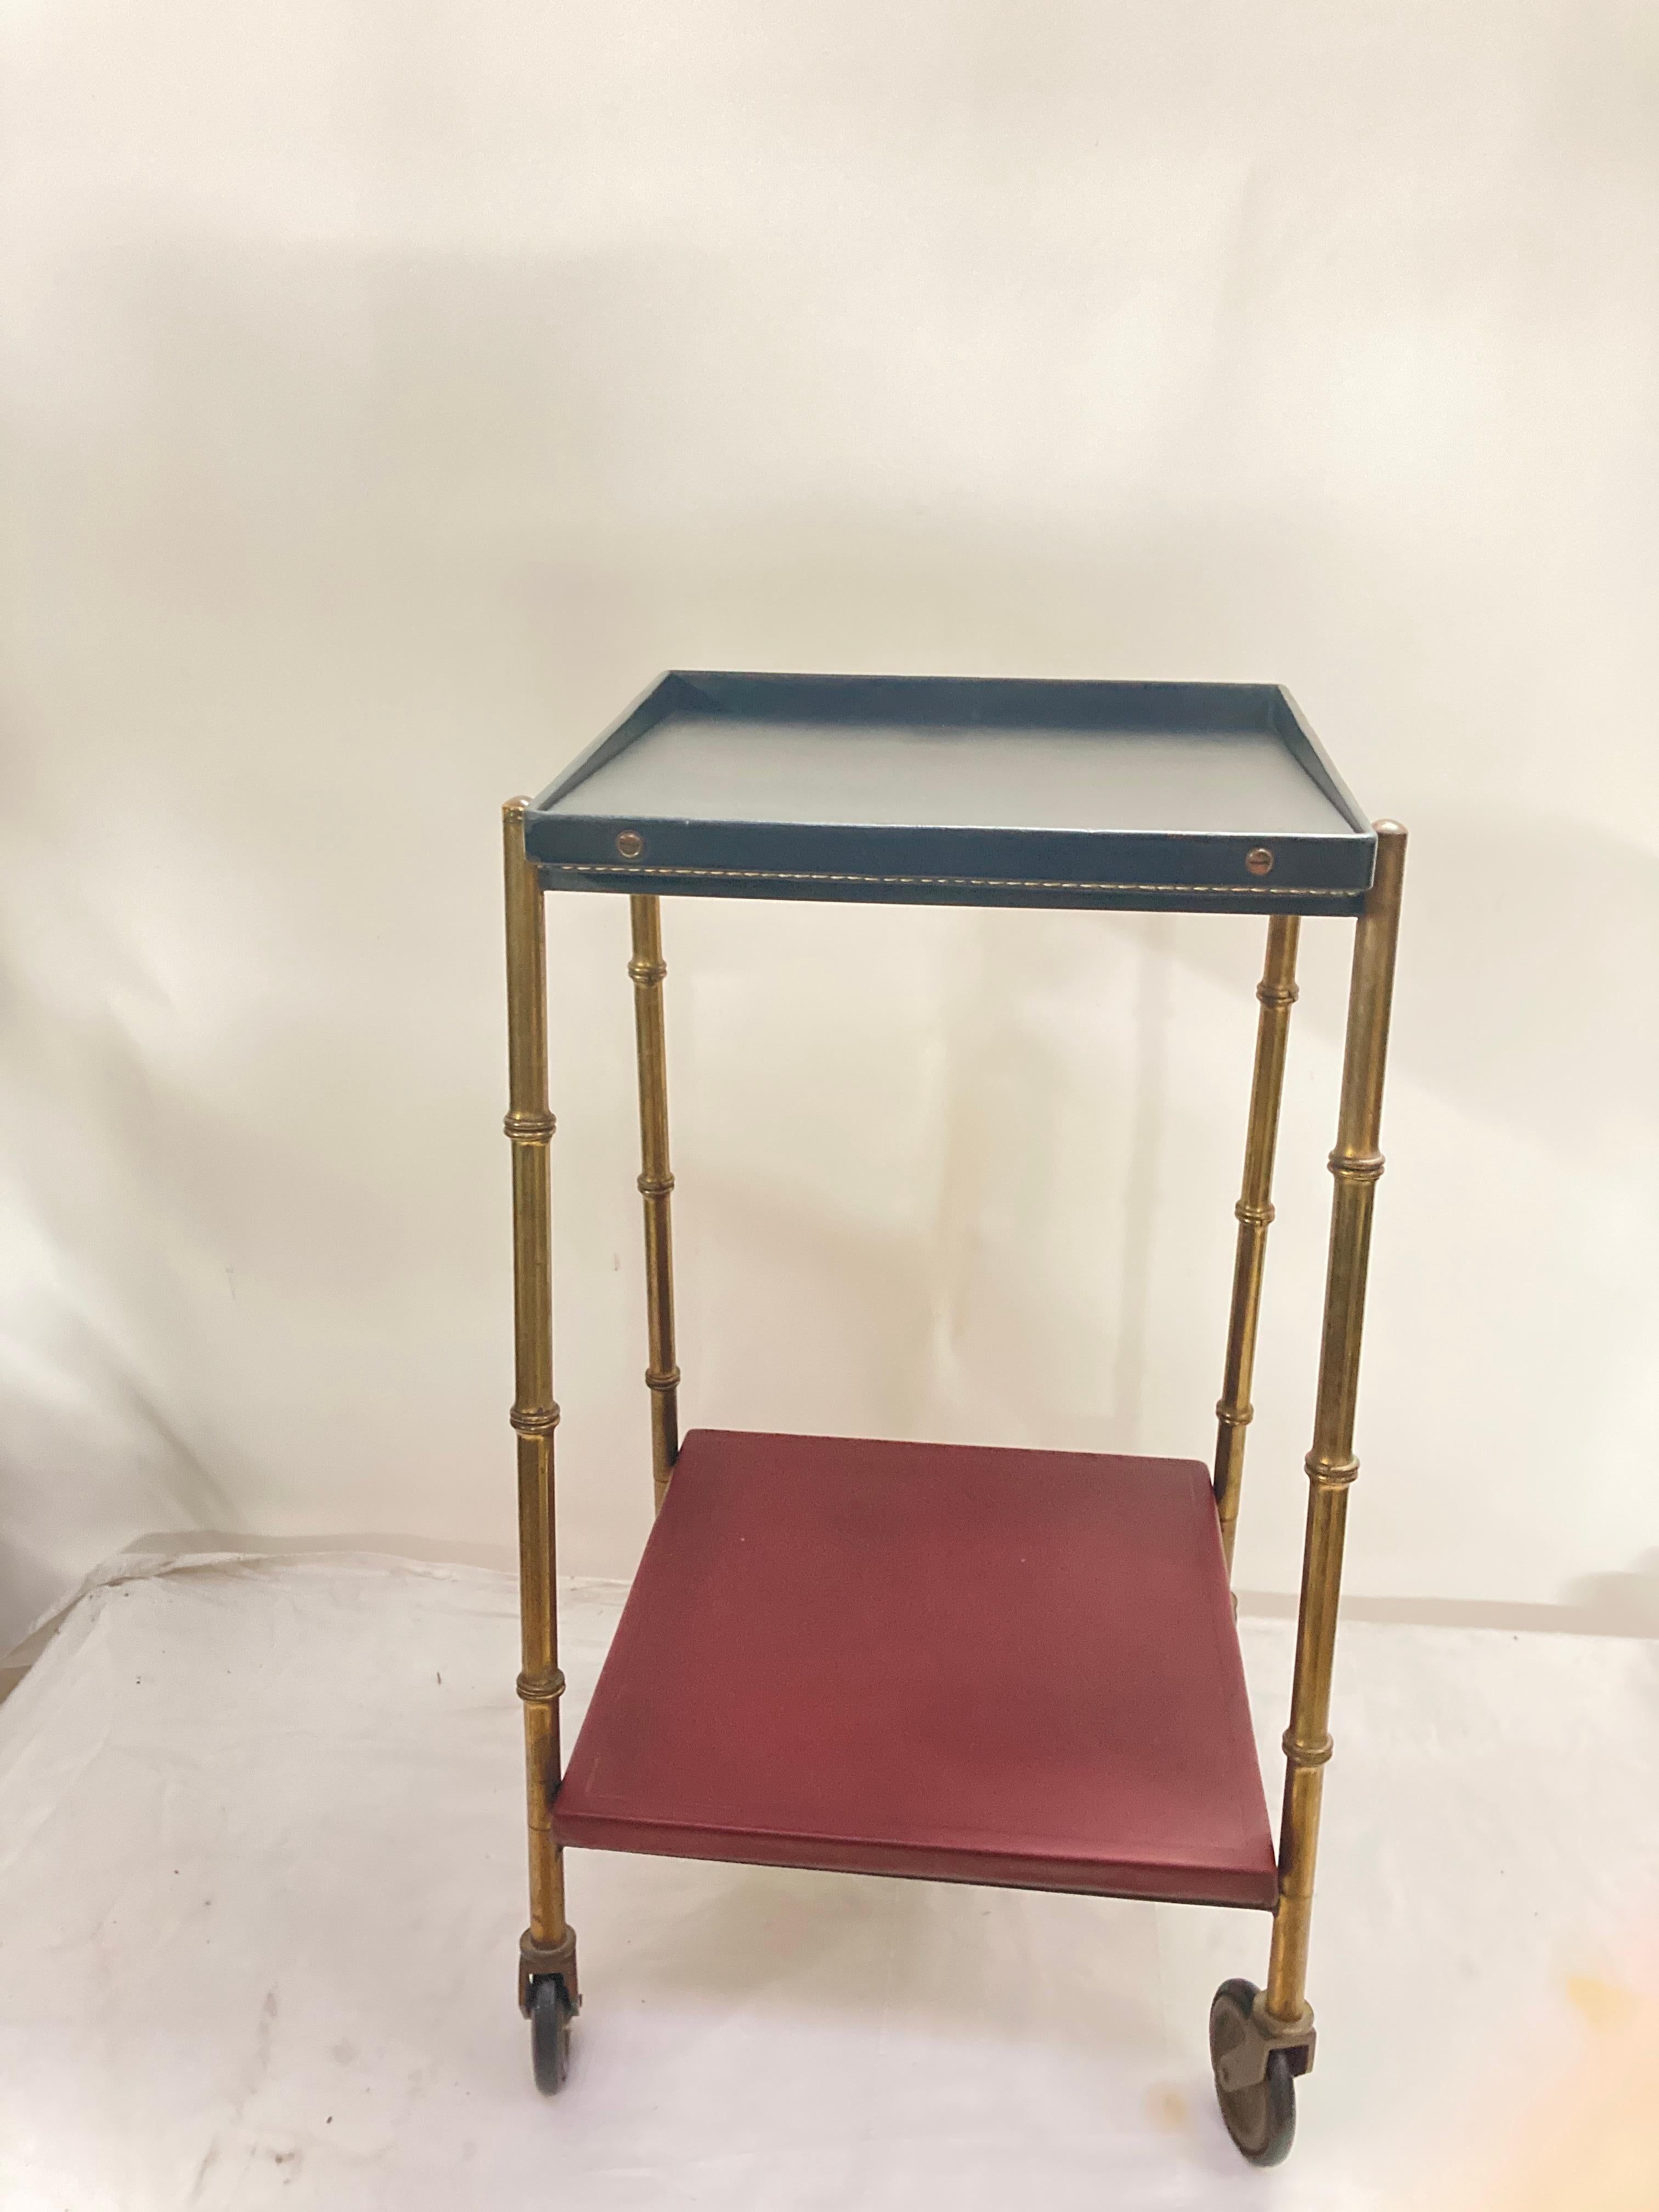 1950's Stitched leather and brass table by Jacques Adnet
France